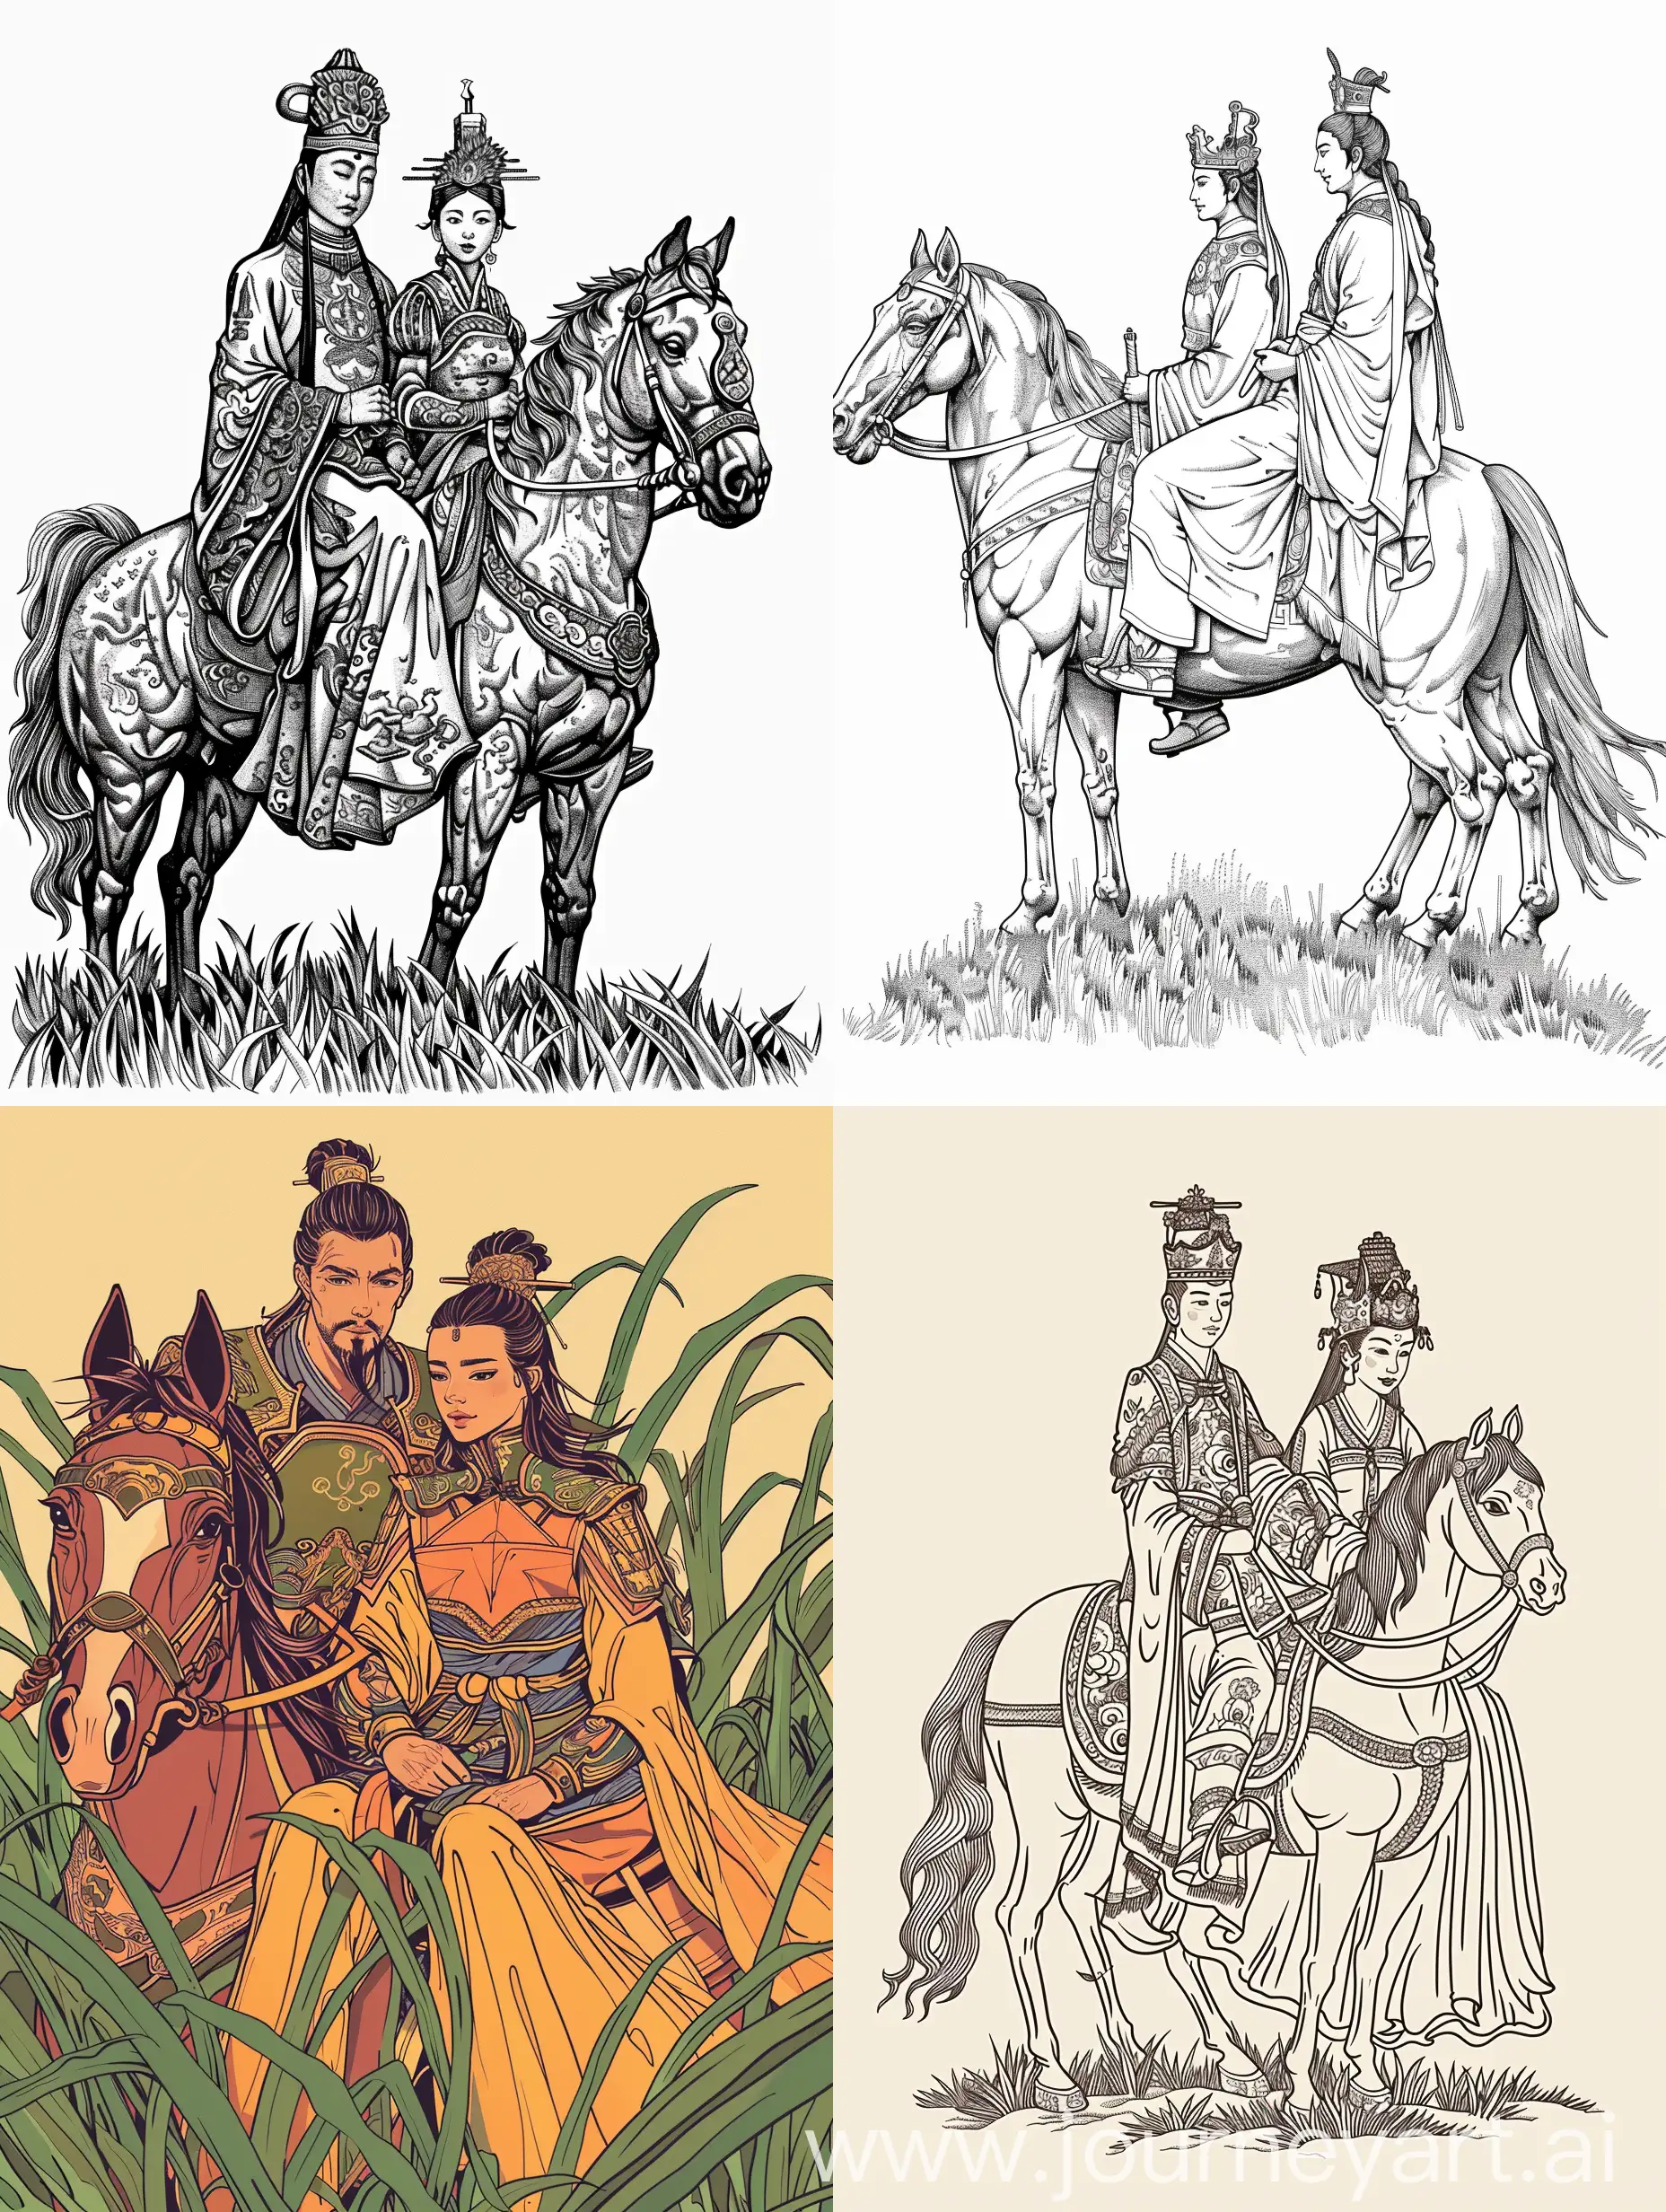 Minimalistic-Black-Stroke-Illustration-Young-King-and-Princess-on-Horseback-in-Chinese-Style-Relief-Sculpture